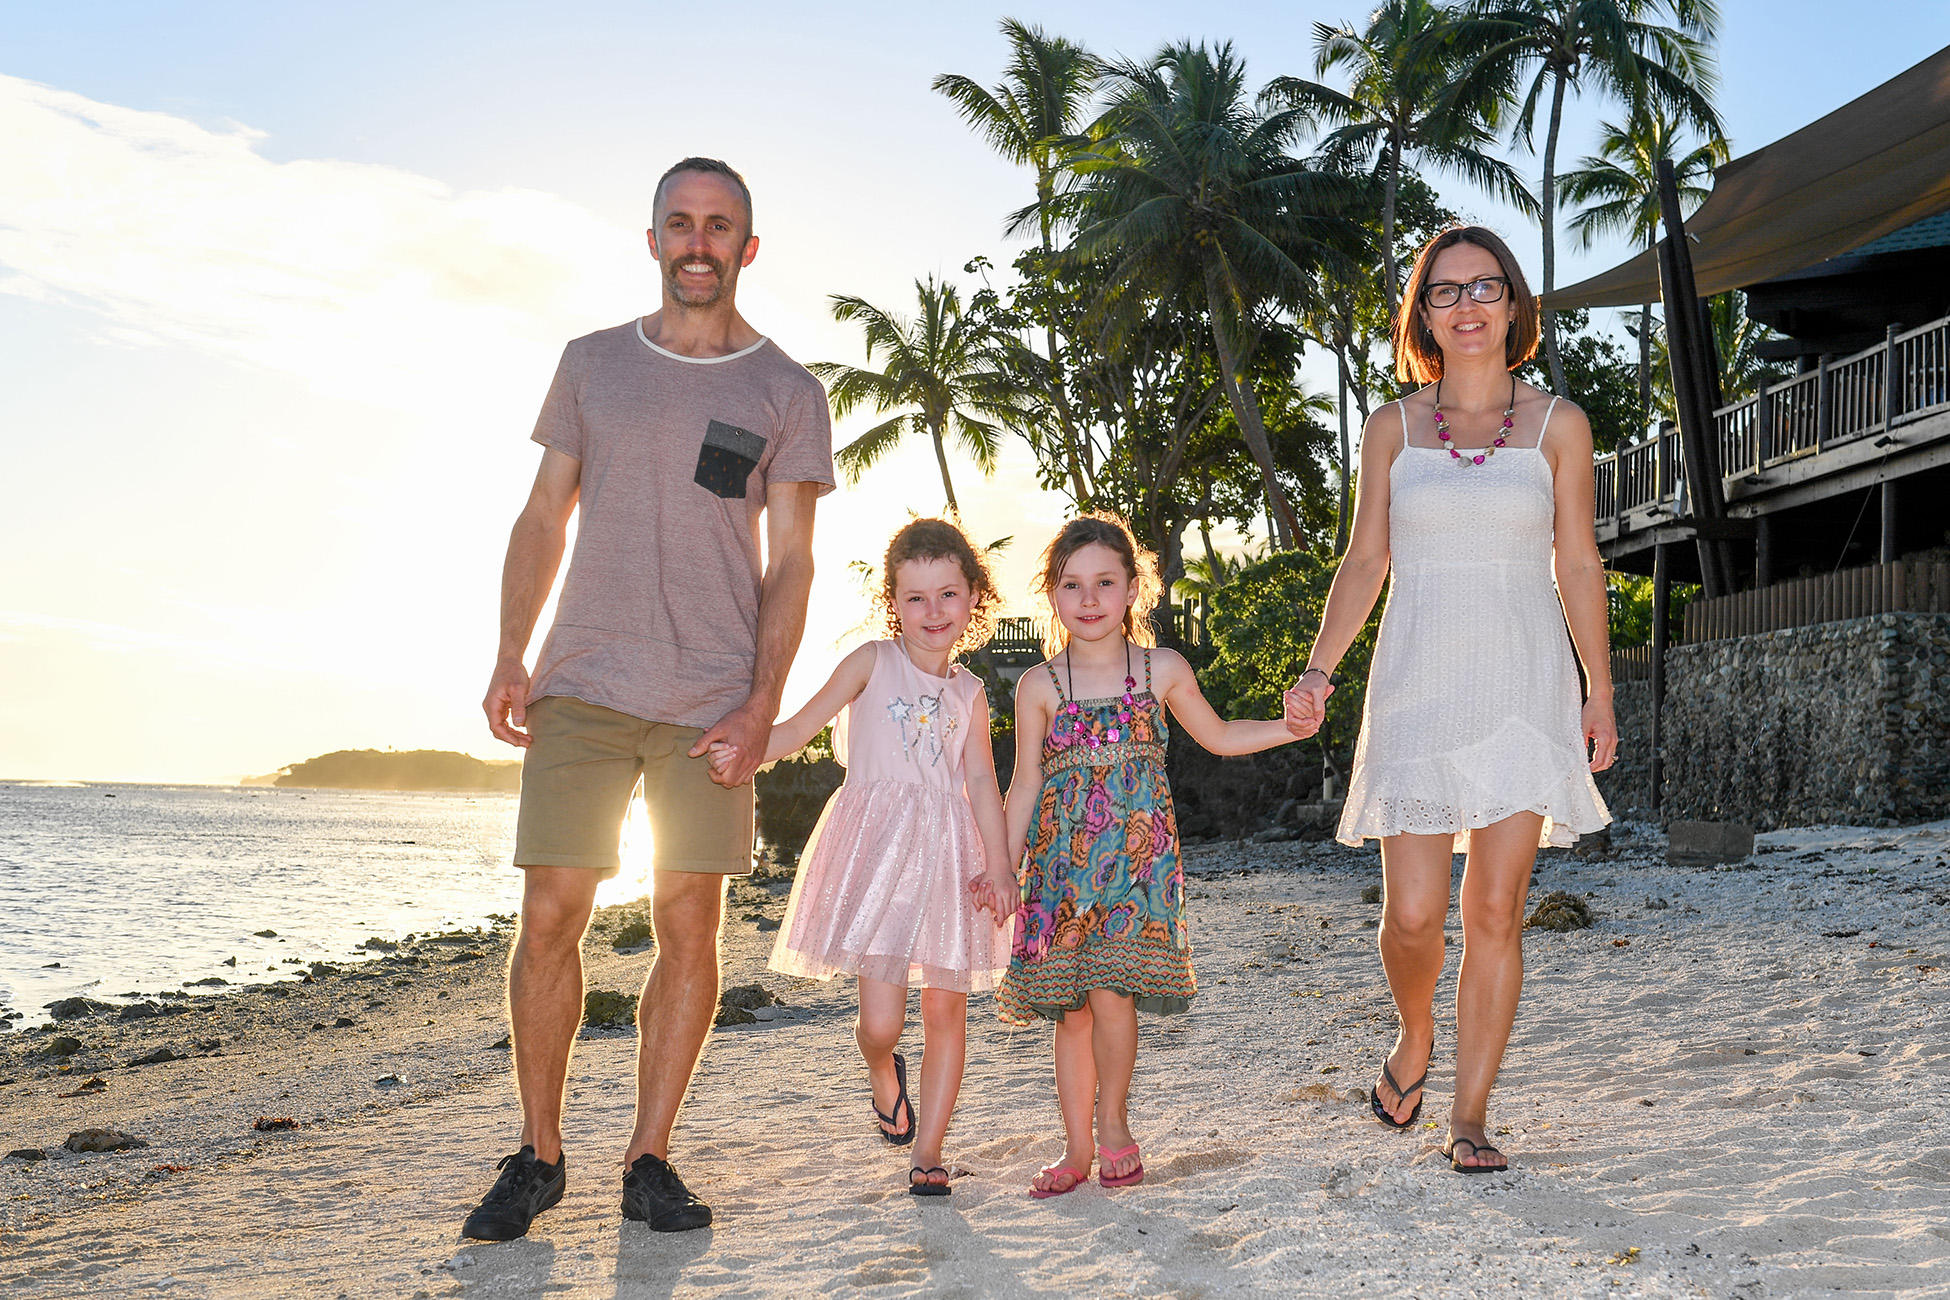 Family walking holding hands on the beach in Fiji